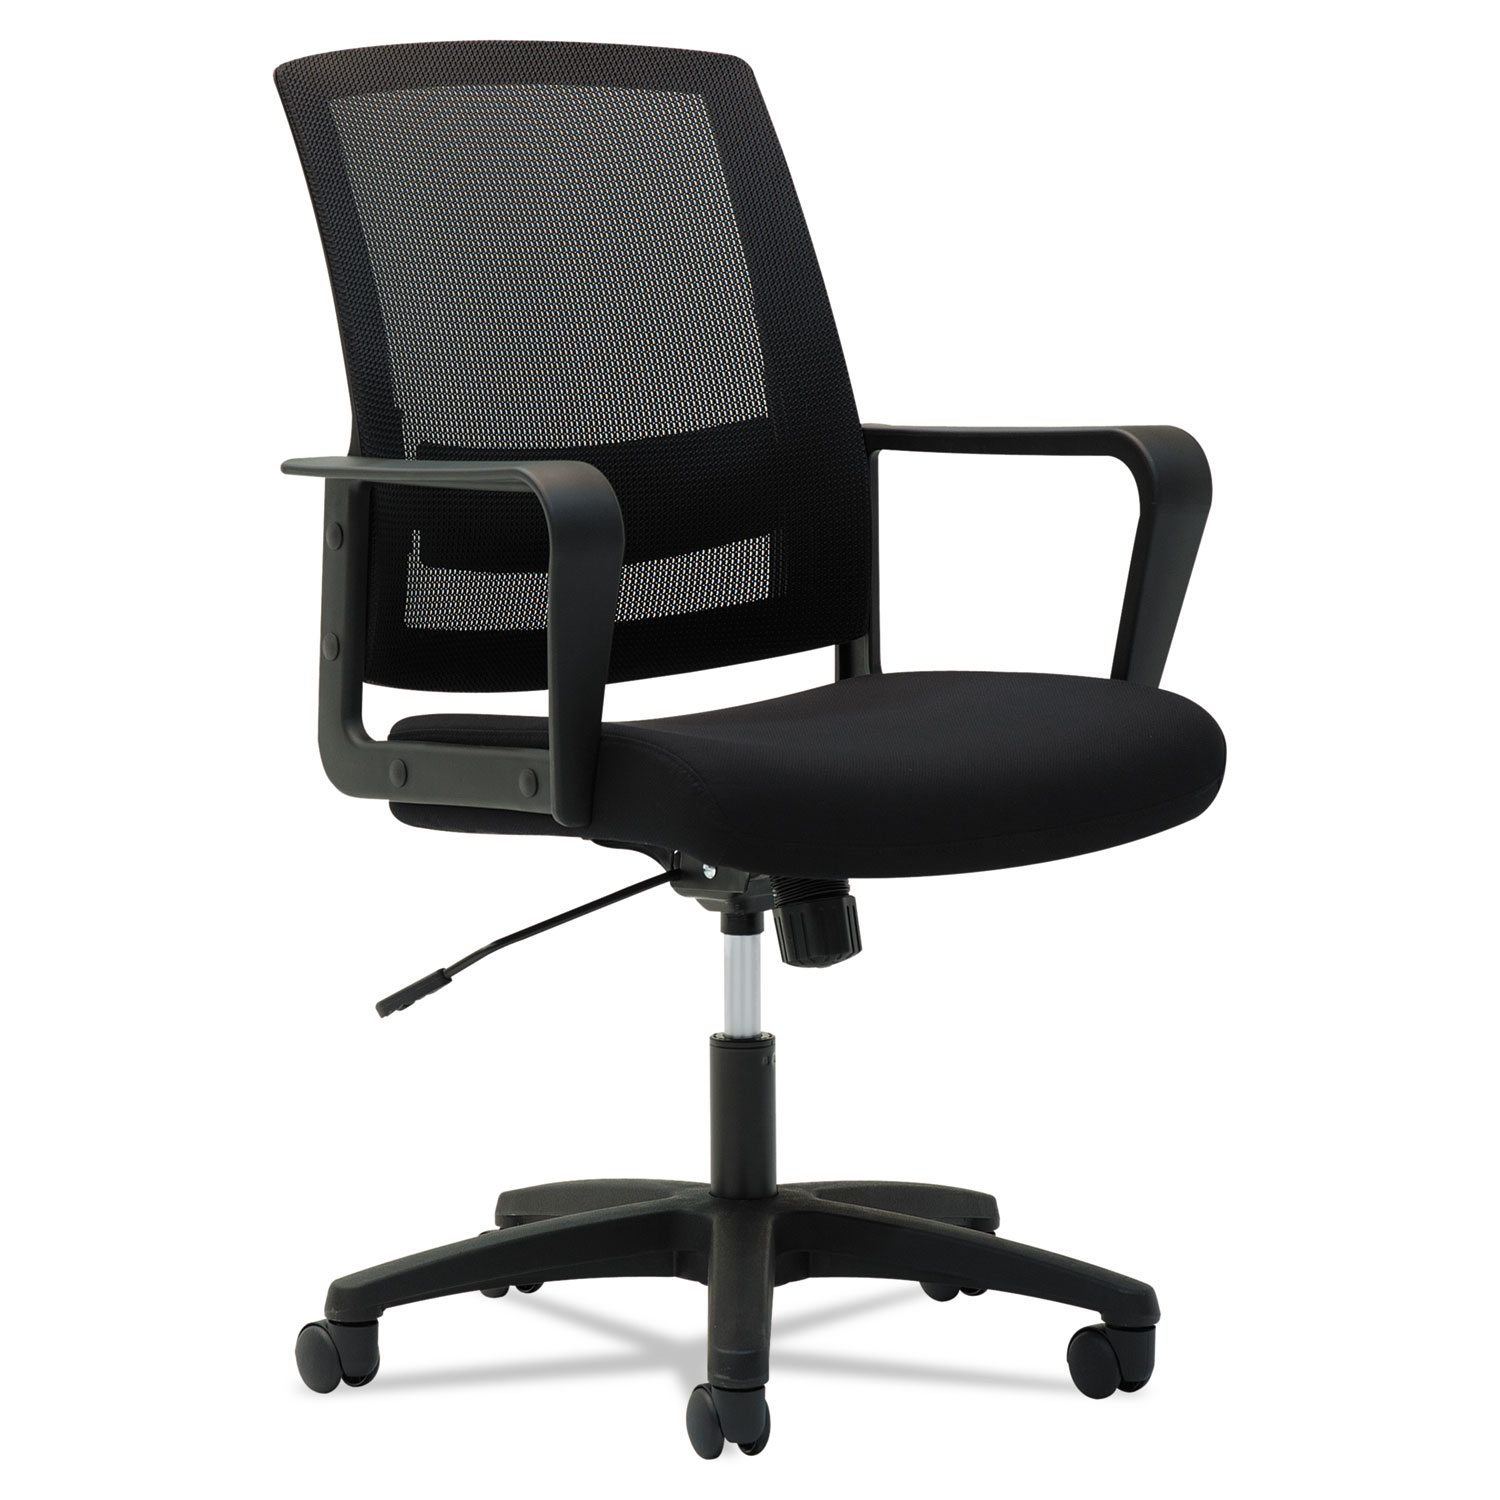  OIF OIFMS4217 Mesh Mid-Back Chair, Supports up to 225 lbs., Black Seat/Black Back, Black Base (OIFMS4217) 